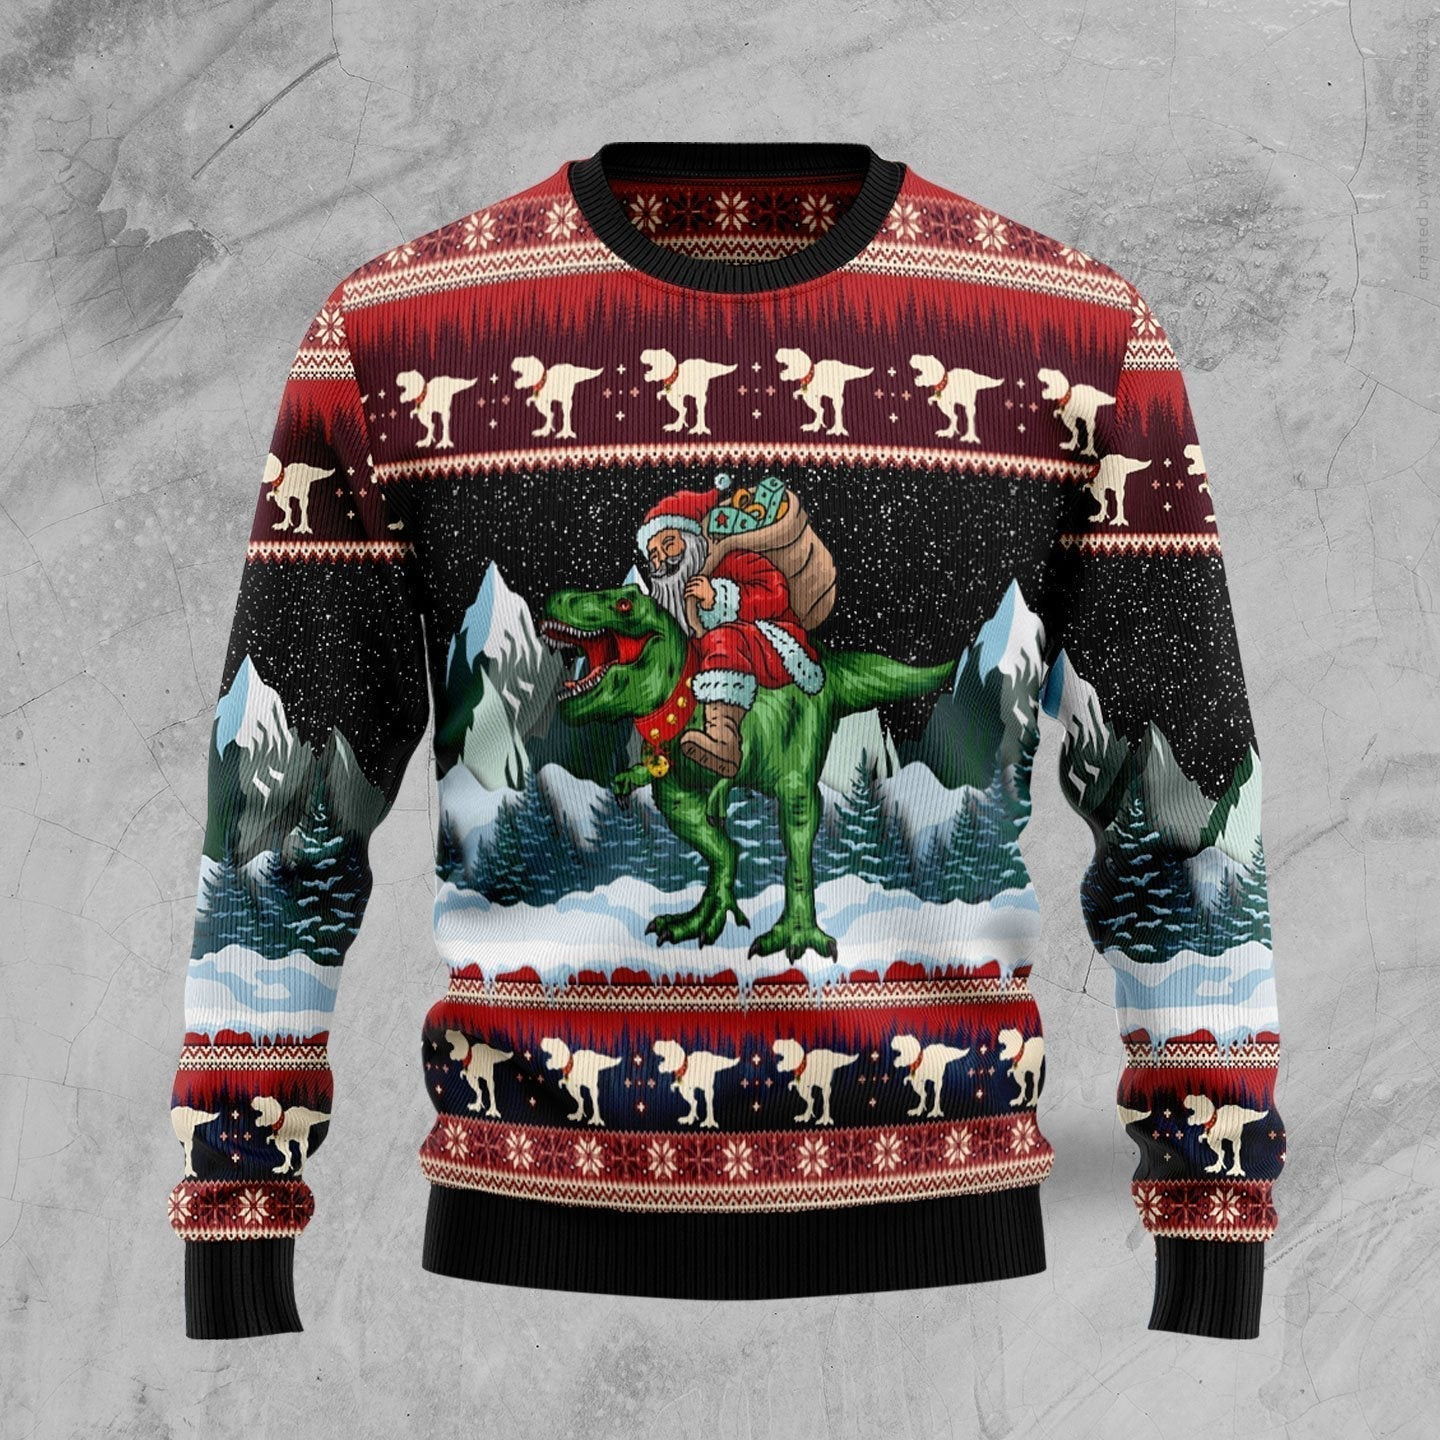 T-rex Santa Ugly Christmas Sweater Ugly Sweater For Men Women